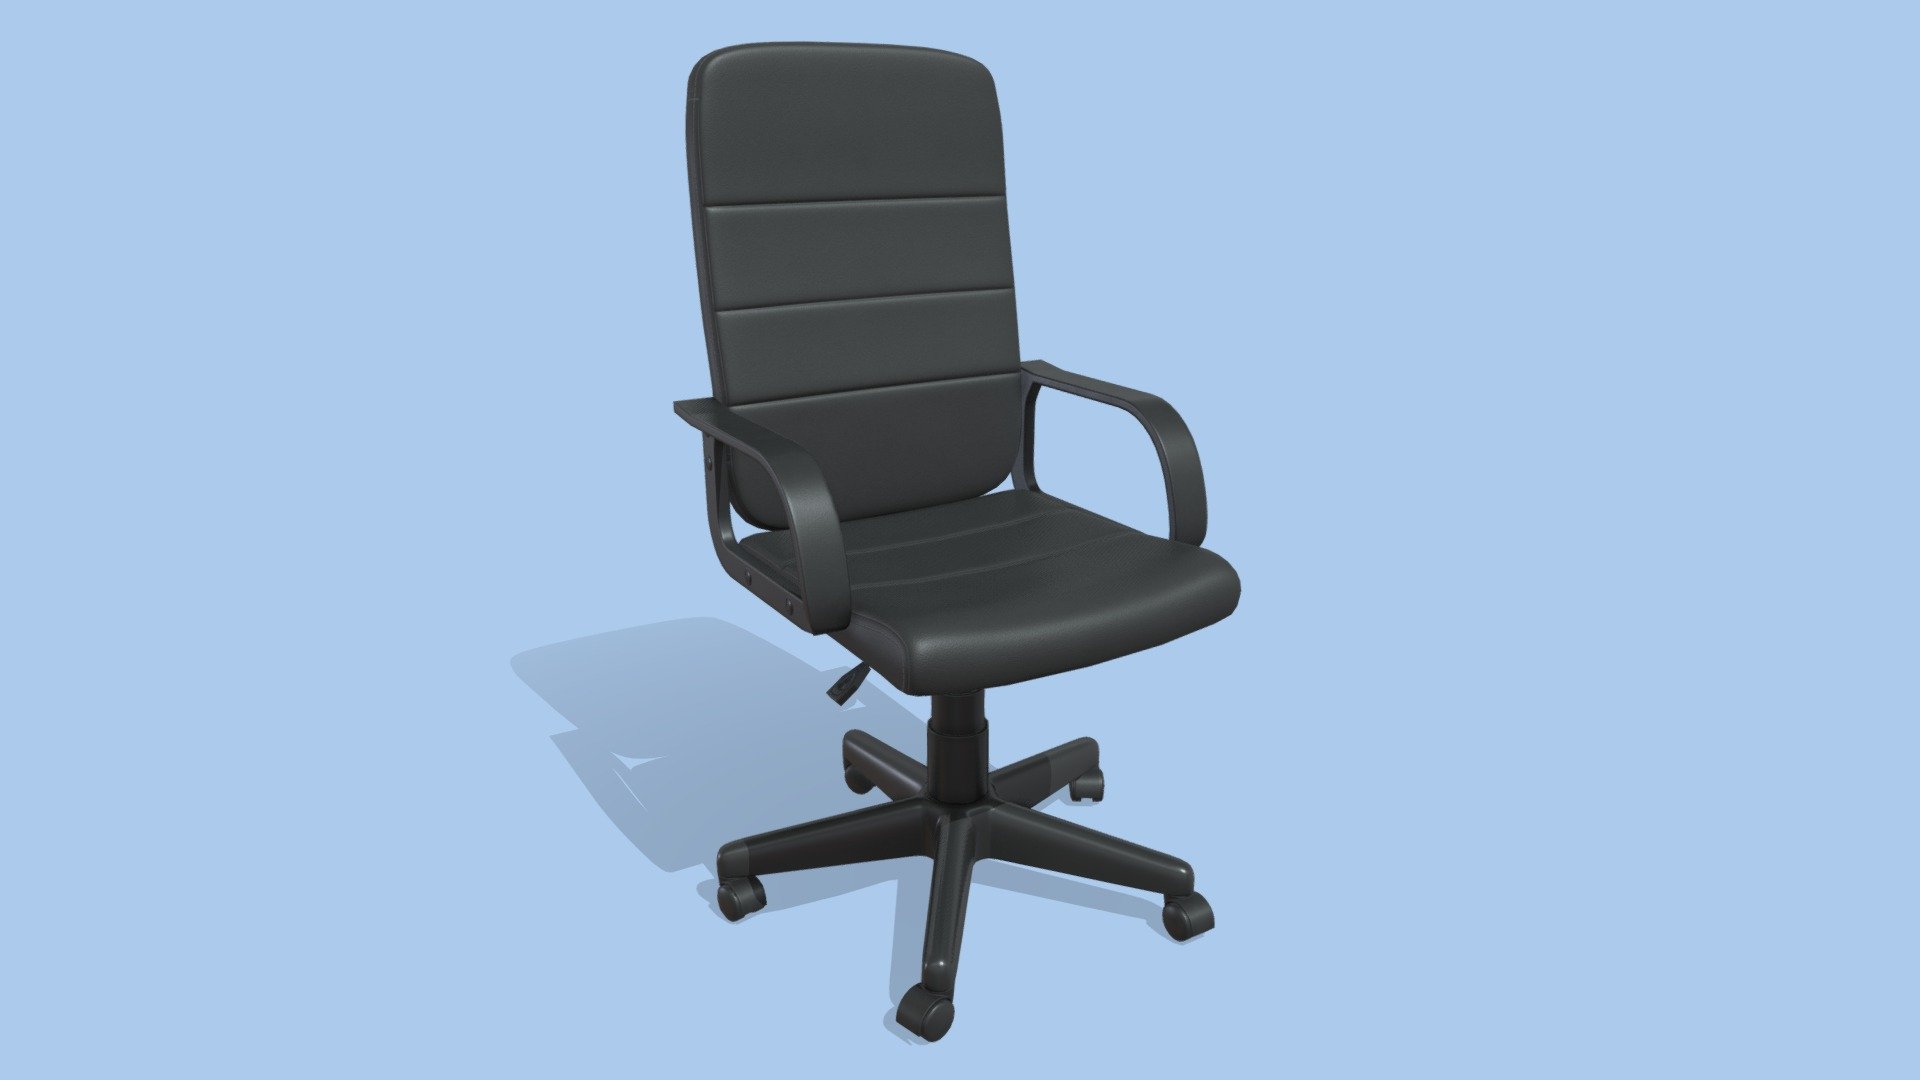 Game ready low-poly Office Chair model with PBR textures for game engines/renderers.

This product is intended for game/real time/background use. This model is not intended for subdivision. Geometry is triangulated. Model unwrapped manually. All materials and objects named appropriately. Scaled to approximate real world size. Tested in Marmoset Toolbag 3. Tested in Unreal Engine 4. Tested in Unity. No special plugins needed. .obj and .fbx versions exported from Blender 2.83.

4096x4096 textures in png format included:
- General PBR Metallic/Roughness  textures: BaseColor, Metallic, Roughness, Normal(DirectX), Normal(OpenGL), AO;
- Unity Textures: Albedo, MetallicSmoothness, Normal, AO;
- Unreal Engine 4 textures: BaseColor, OcclusionRoughnessMetallic, Normal;
- PBR Specular/Glossiness textures: Diffuse, Specular, Glossiness, Normal(DirectX), Normal(OpenGL), AO.

Also included old variant of textures
 - Office Chair - Buy Royalty Free 3D model by AshMesh 3d model